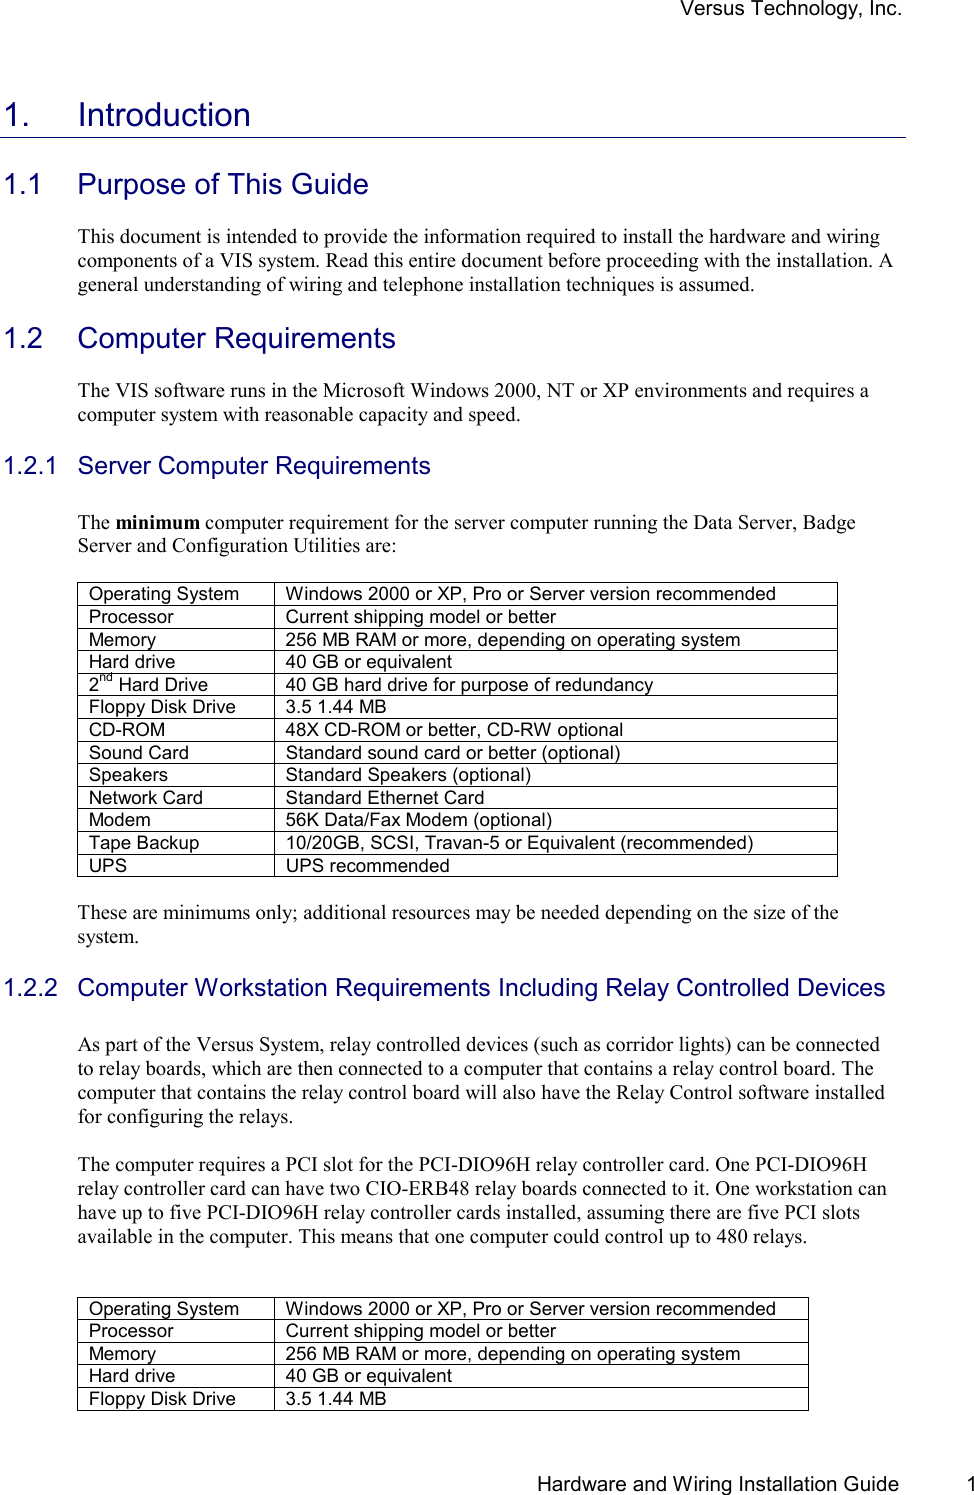 Versus Technology, Inc.   Hardware and Wiring Installation Guide  1 1. Introduction  1.1  Purpose of This Guide  This document is intended to provide the information required to install the hardware and wiring components of a VIS system. Read this entire document before proceeding with the installation. A general understanding of wiring and telephone installation techniques is assumed.    1.2  Computer Requirements   The VIS software runs in the Microsoft Windows 2000, NT or XP environments and requires a computer system with reasonable capacity and speed.  1.2.1  Server Computer Requirements  The minimum computer requirement for the server computer running the Data Server, Badge Server and Configuration Utilities are:  Operating System  Windows 2000 or XP, Pro or Server version recommended Processor  Current shipping model or better Memory  256 MB RAM or more, depending on operating system Hard drive  40 GB or equivalent  2nd Hard Drive  40 GB hard drive for purpose of redundancy Floppy Disk Drive  3.5 1.44 MB CD-ROM  48X CD-ROM or better, CD-RW optional Sound Card  Standard sound card or better (optional) Speakers Standard Speakers (optional) Network Card  Standard Ethernet Card Modem  56K Data/Fax Modem (optional) Tape Backup  10/20GB, SCSI, Travan-5 or Equivalent (recommended) UPS UPS recommended  These are minimums only; additional resources may be needed depending on the size of the system.  1.2.2  Computer Workstation Requirements Including Relay Controlled Devices  As part of the Versus System, relay controlled devices (such as corridor lights) can be connected to relay boards, which are then connected to a computer that contains a relay control board. The computer that contains the relay control board will also have the Relay Control software installed for configuring the relays.   The computer requires a PCI slot for the PCI-DIO96H relay controller card. One PCI-DIO96H relay controller card can have two CIO-ERB48 relay boards connected to it. One workstation can have up to five PCI-DIO96H relay controller cards installed, assuming there are five PCI slots available in the computer. This means that one computer could control up to 480 relays.      Operating System  Windows 2000 or XP, Pro or Server version recommended Processor  Current shipping model or better Memory  256 MB RAM or more, depending on operating system Hard drive  40 GB or equivalent Floppy Disk Drive  3.5 1.44 MB 